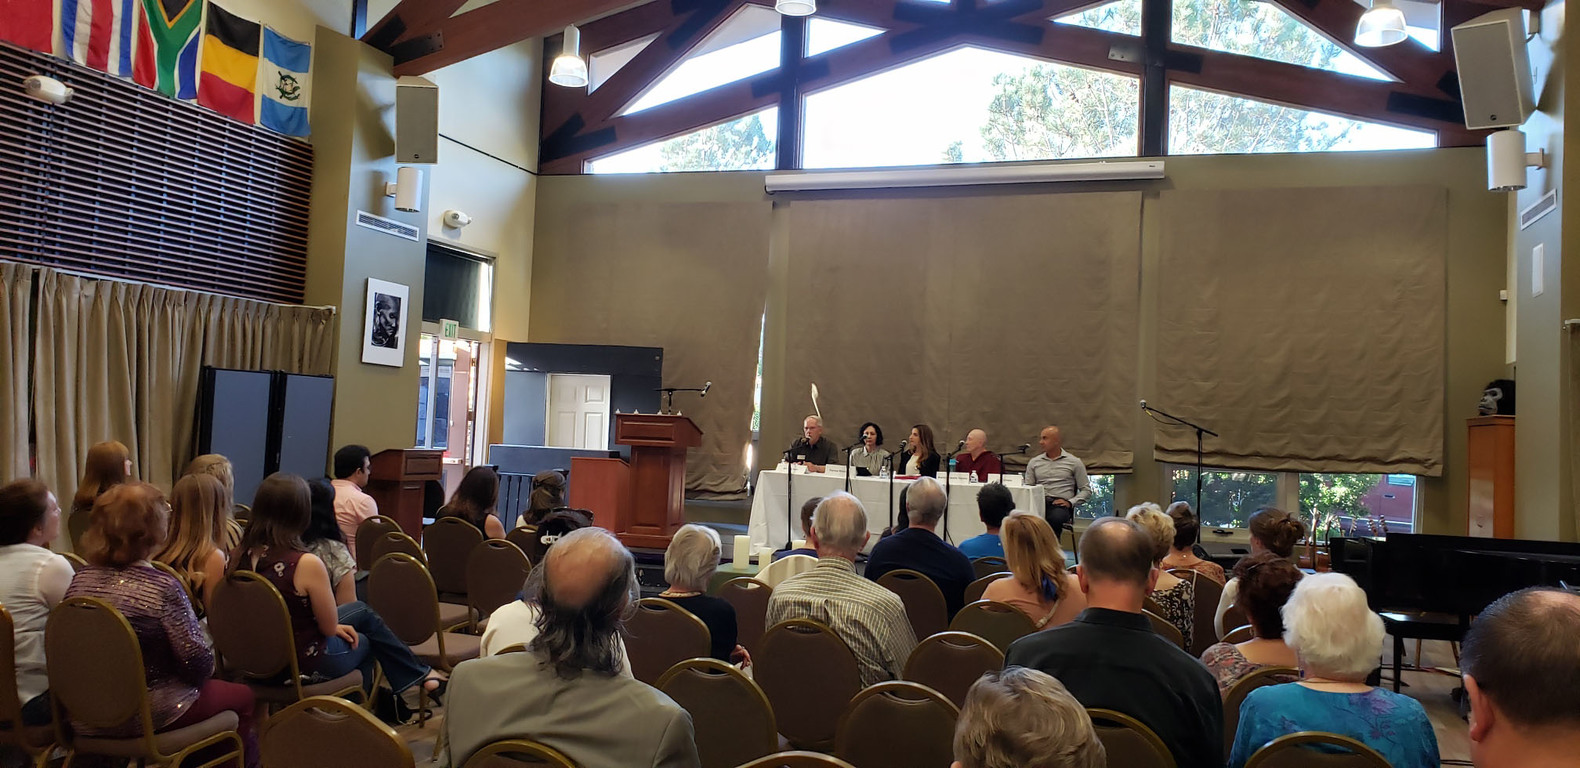 M.T.O. San Diego Hosts Interfaith Panel Discussion During UN International Peace Day